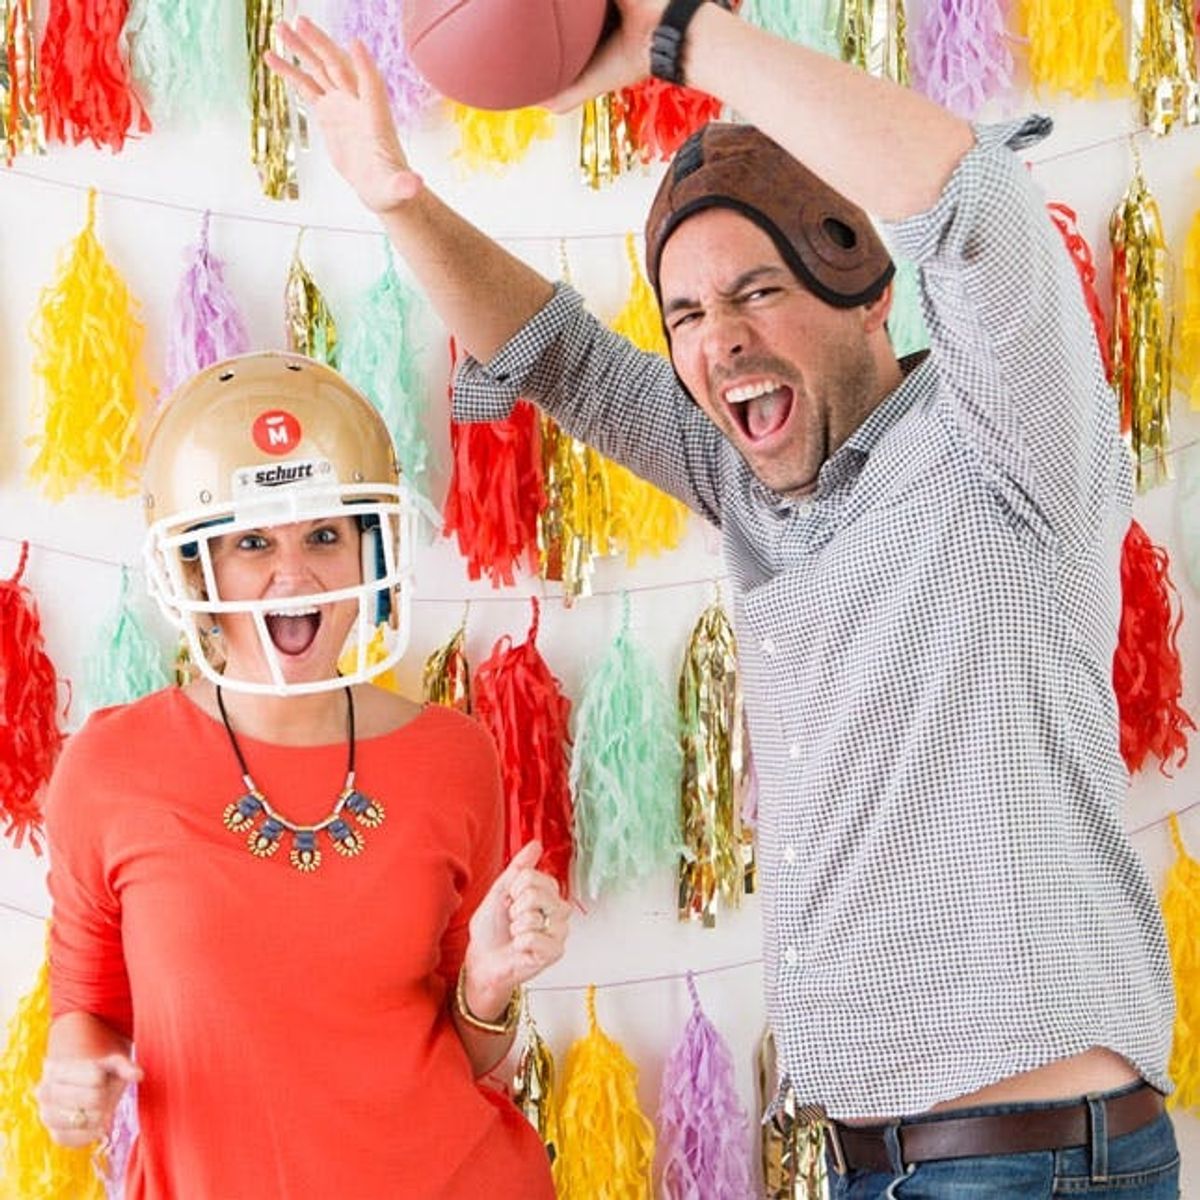 5 Brit-Approved Ways to Win Your Super Bowl Party